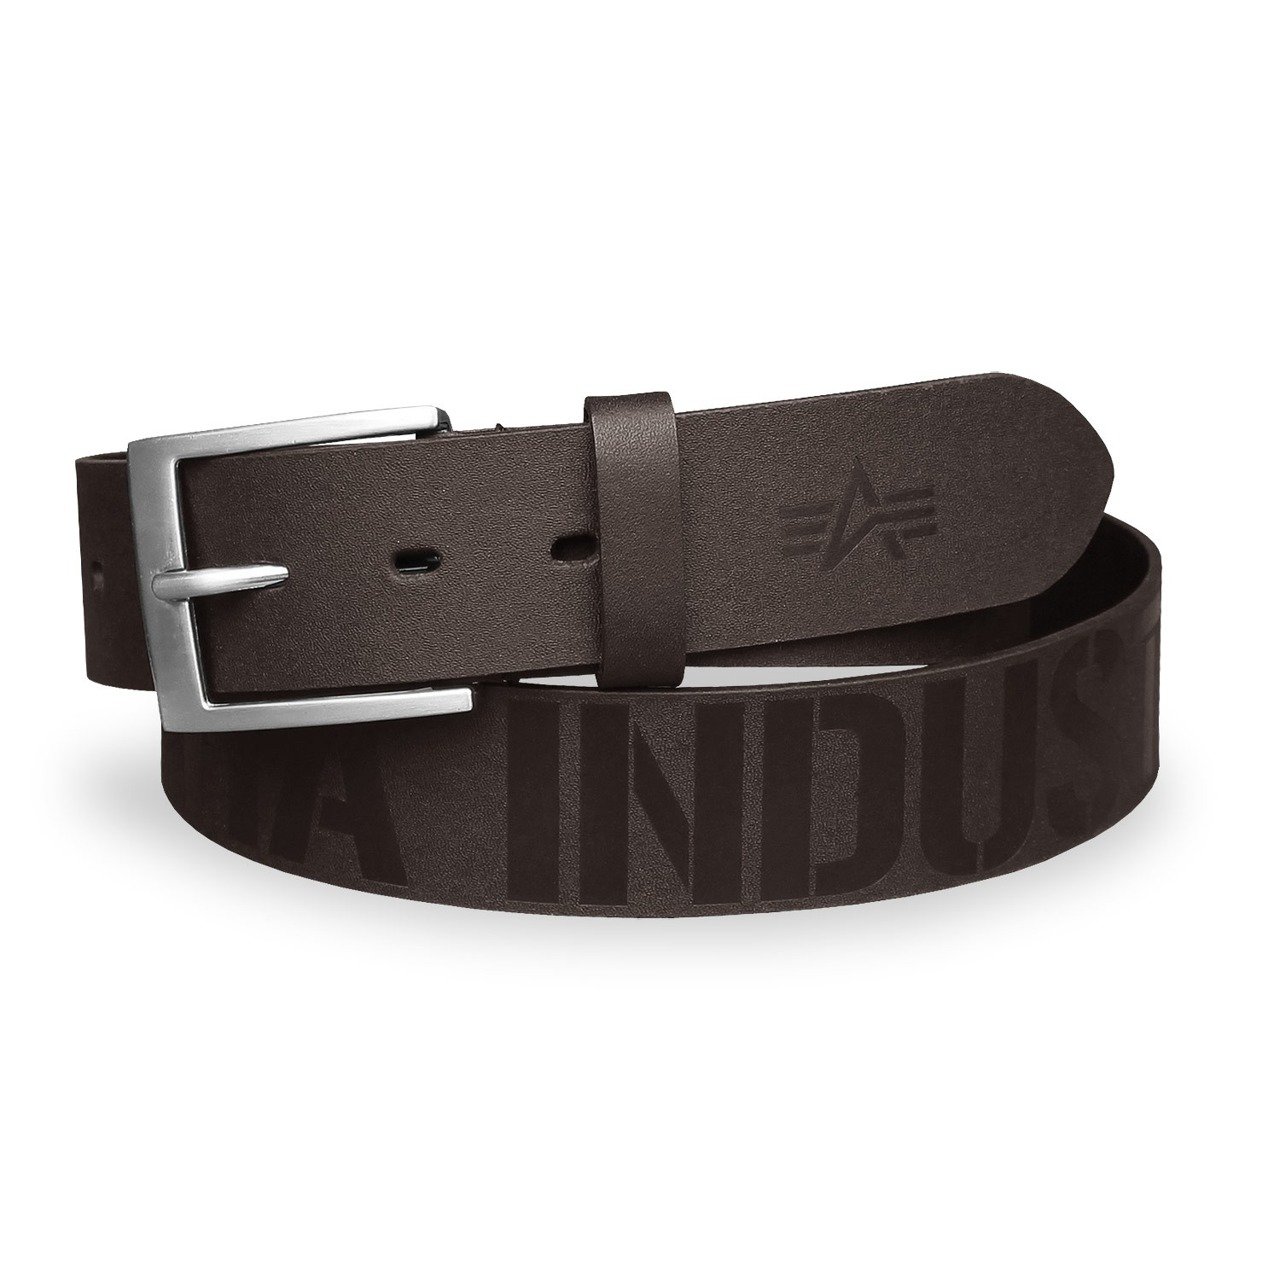 Embossed Alpha Belt brown | Apparel \\ Belts \\ Combat Belts  militarysurplus.eu | Army Navy Surplus - Tactical | Big variety - Cheap  prices | Military Surplus, Clothing, Law Enforcement, Boots, Outdoor &  Tactical Gear